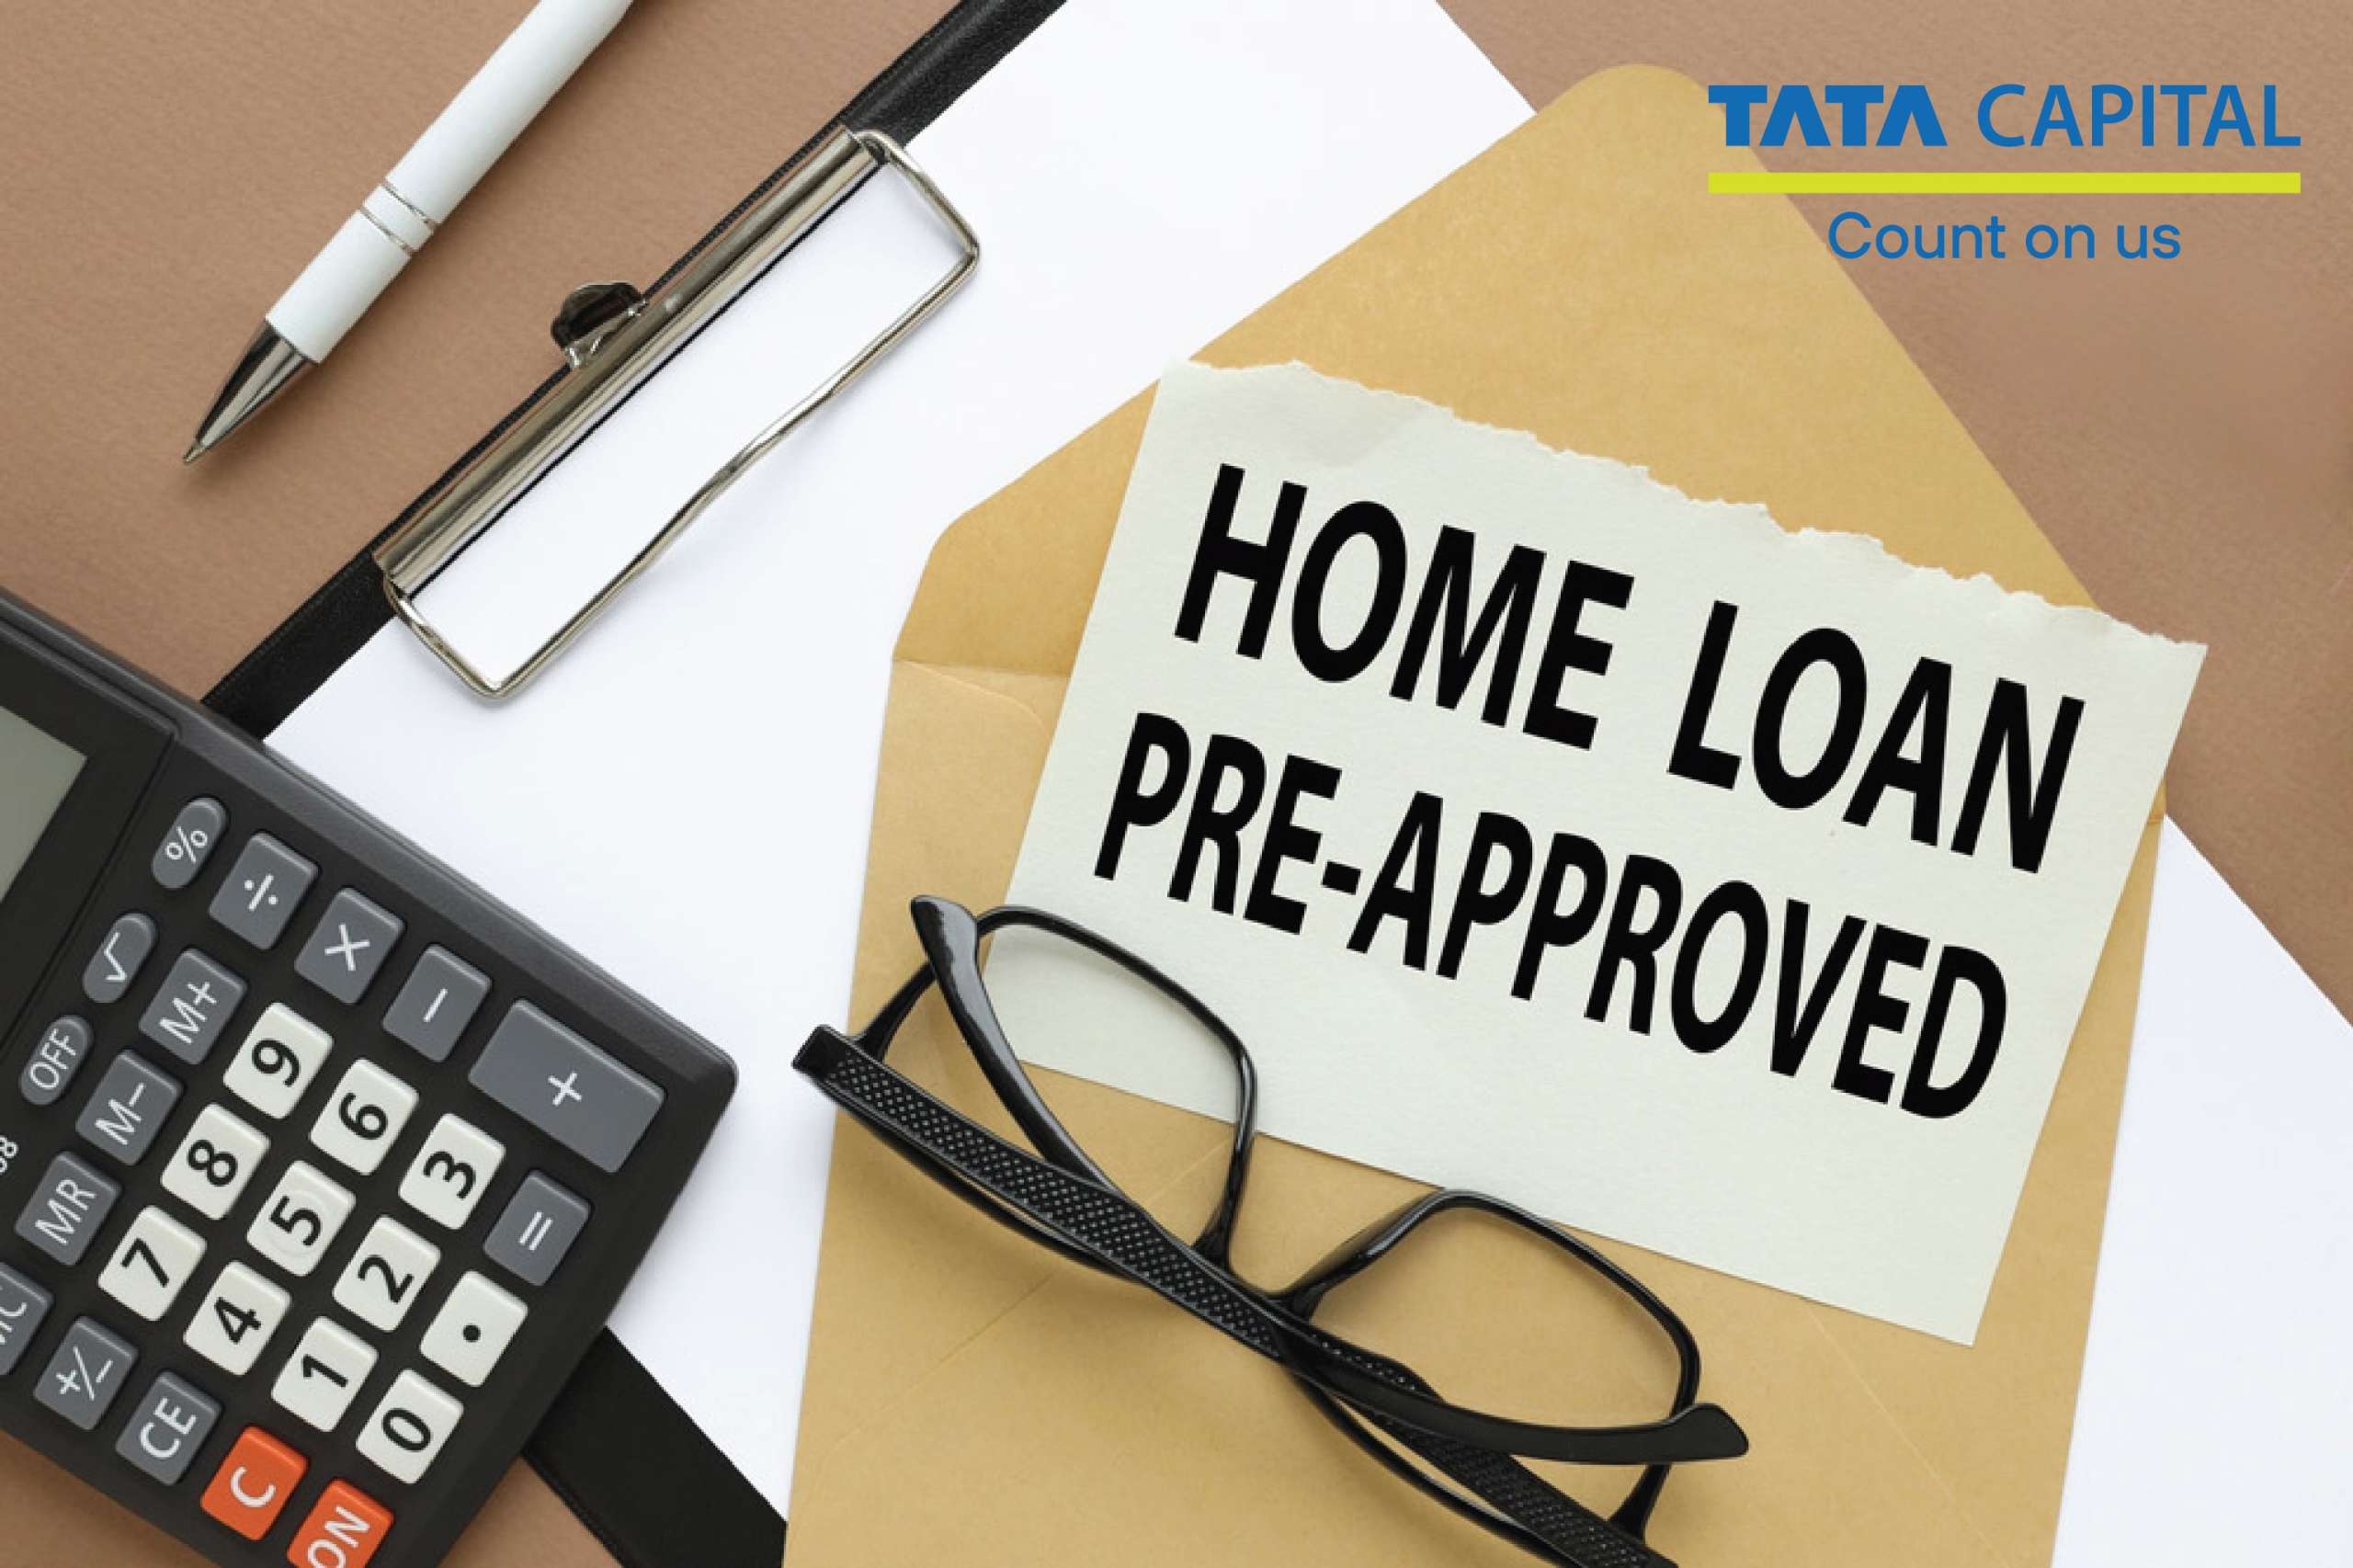 Home Loan Pre-Approval: What You Need To Know